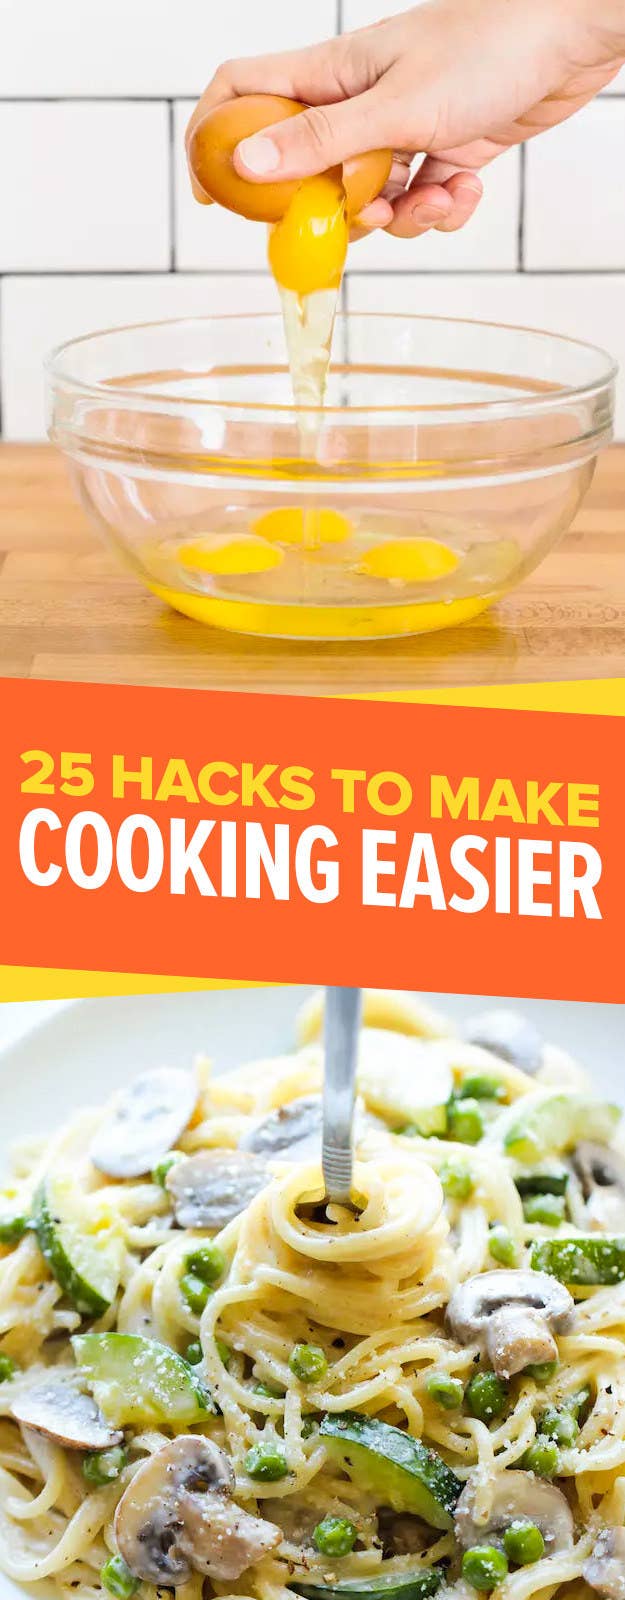 Make Your Cooking Easy and Faster